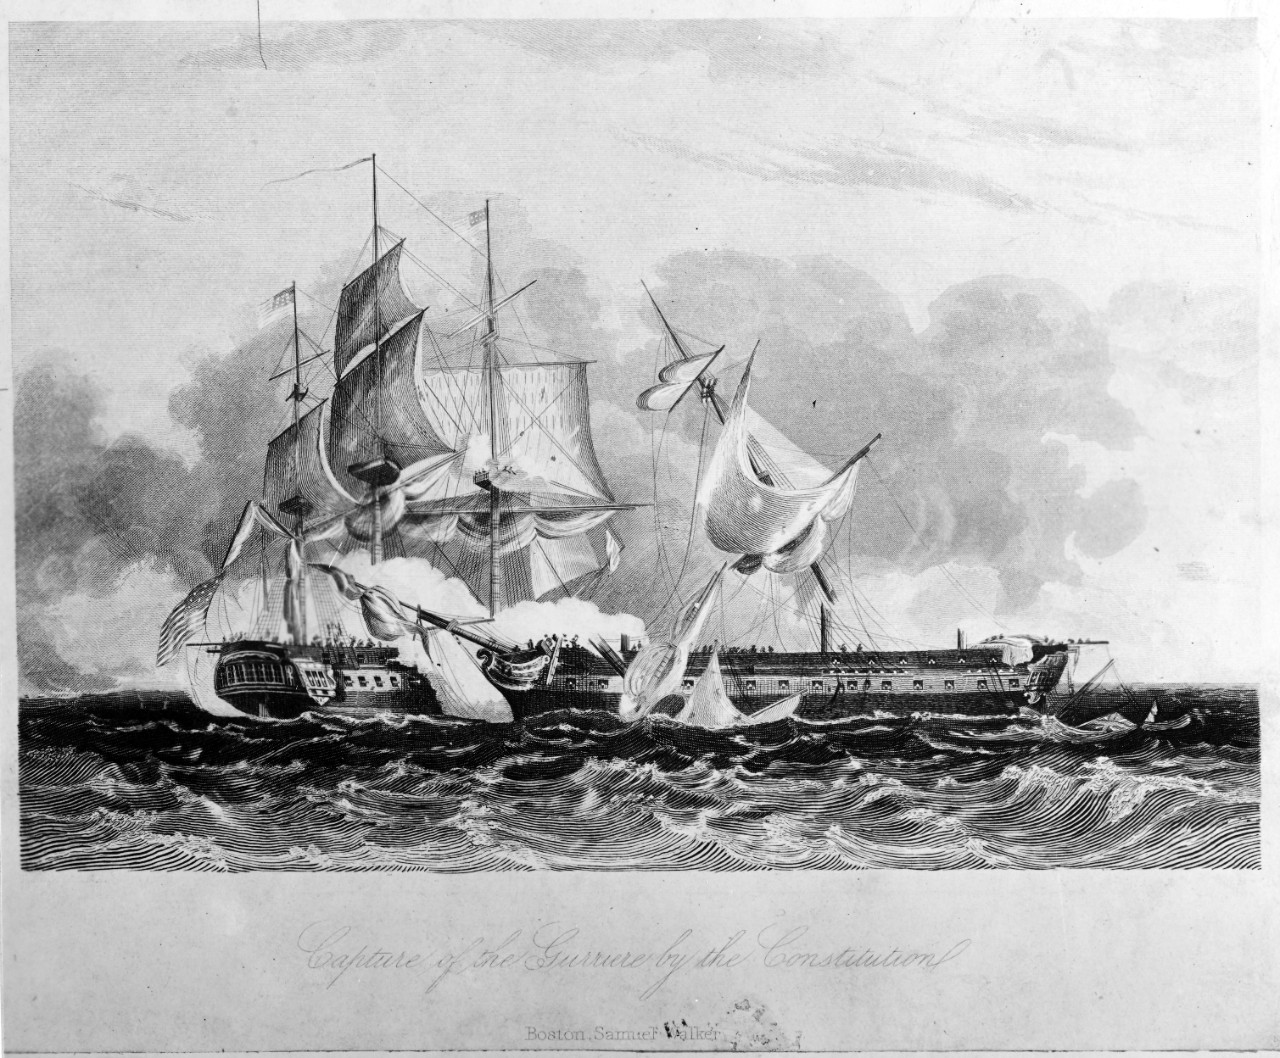 Photo #: NH 2001  Action between USS Constitution and HMS Guerriere, 19 August 1812